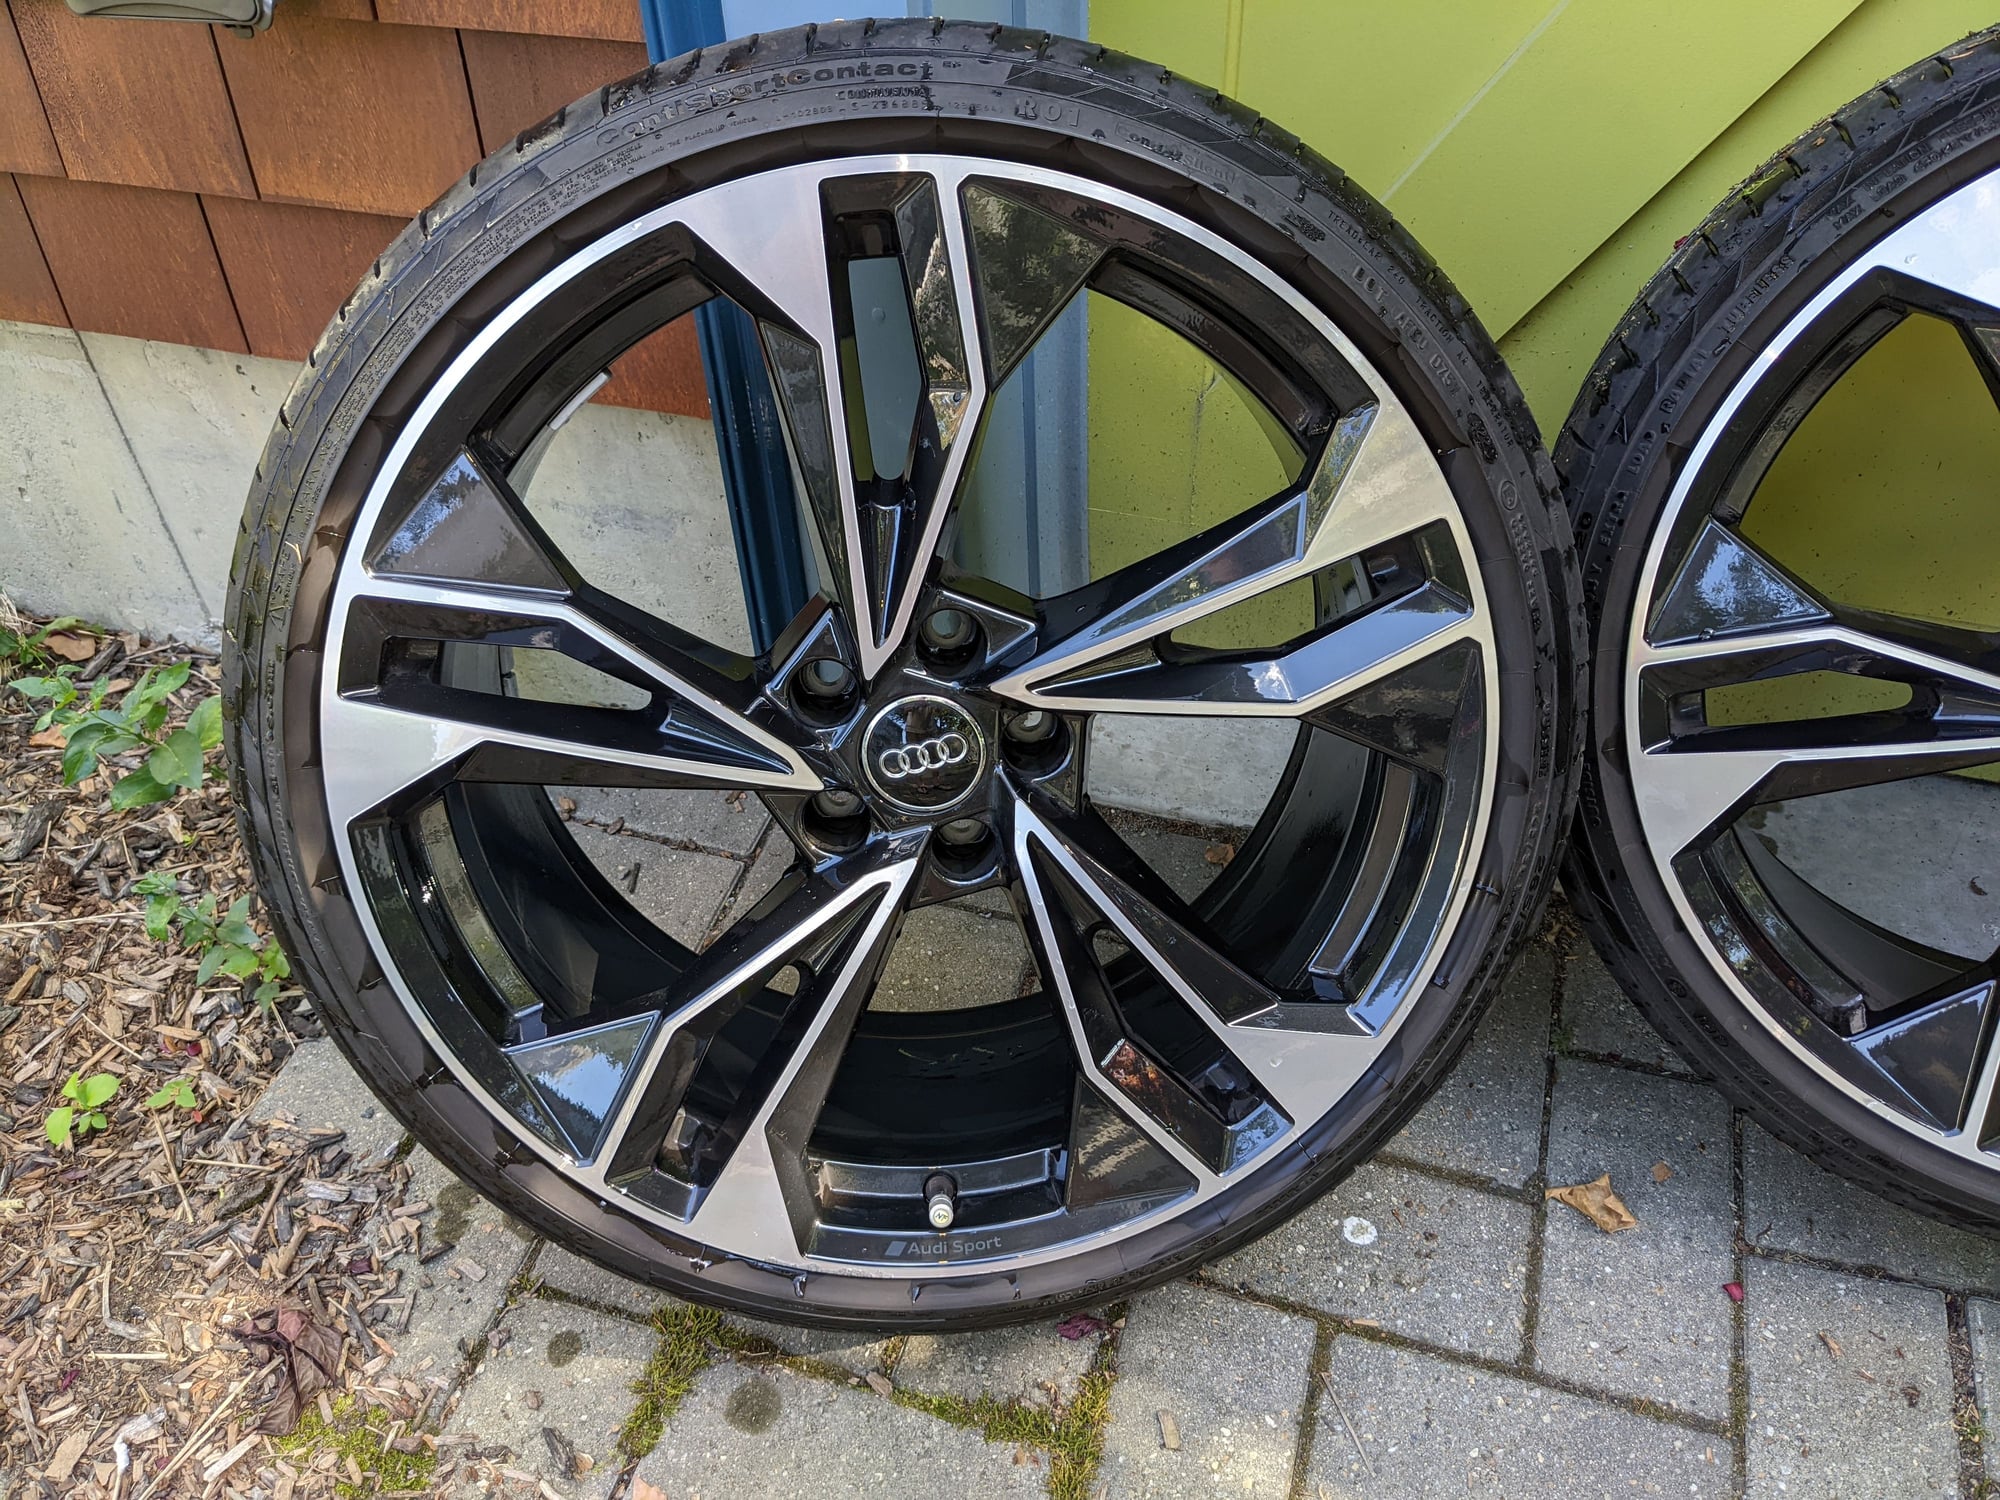 Wheels and Tires/Axles - 2021 S5 OEM Black Optic Wheels and tires 20 x 9 - Used - 2018 to 2022 Audi S5 Sportback - 2018 to 2022 Audi S5 - Somerville, MA 02143, United States